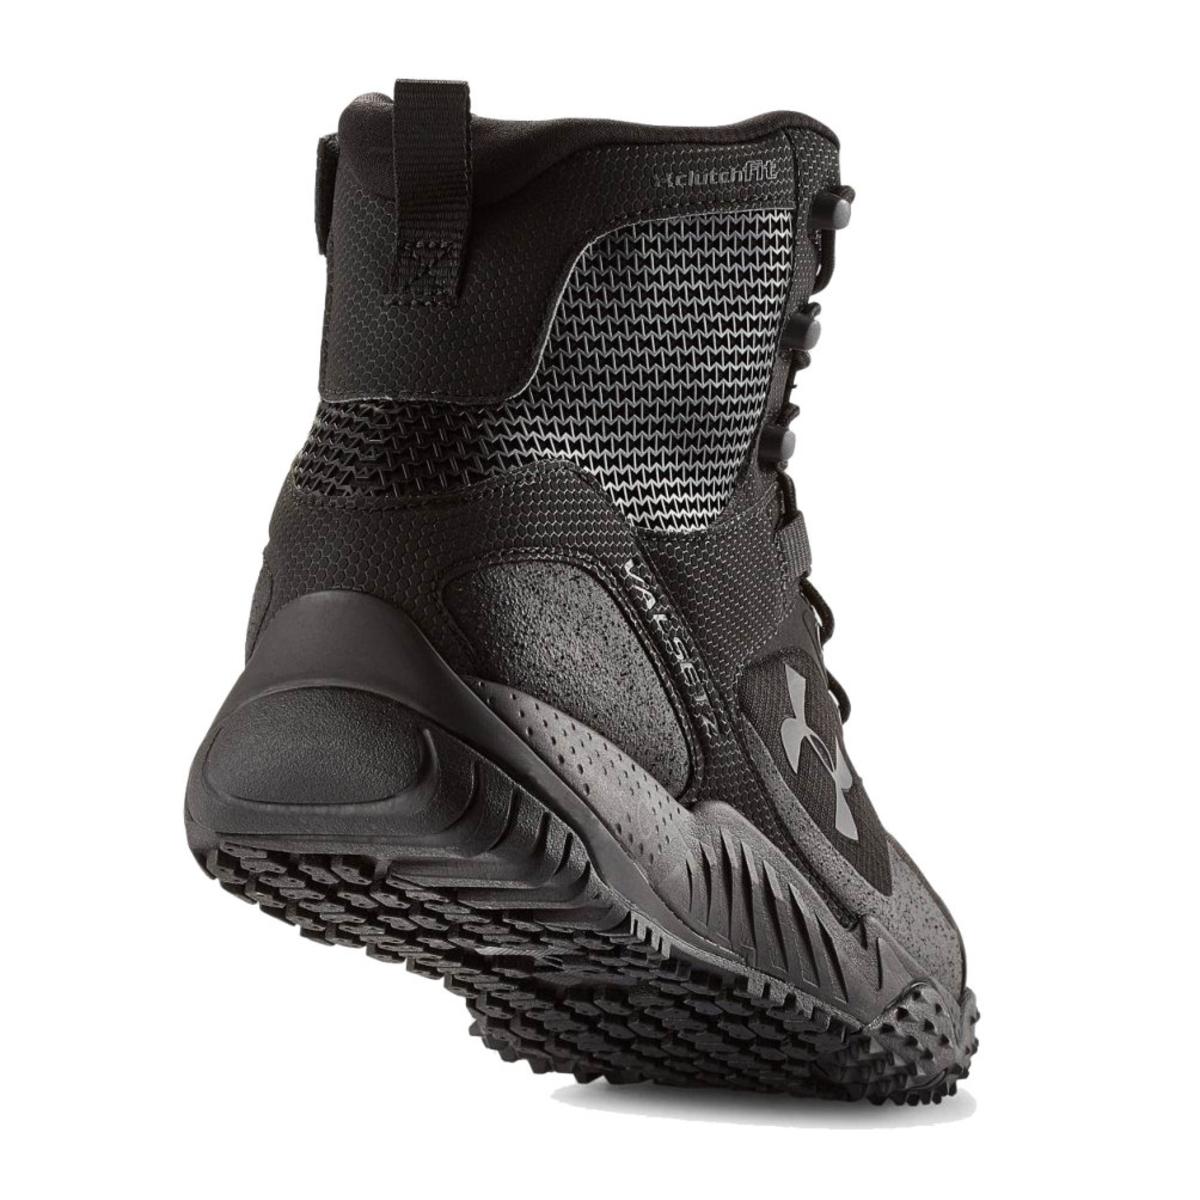 under armor winter boots